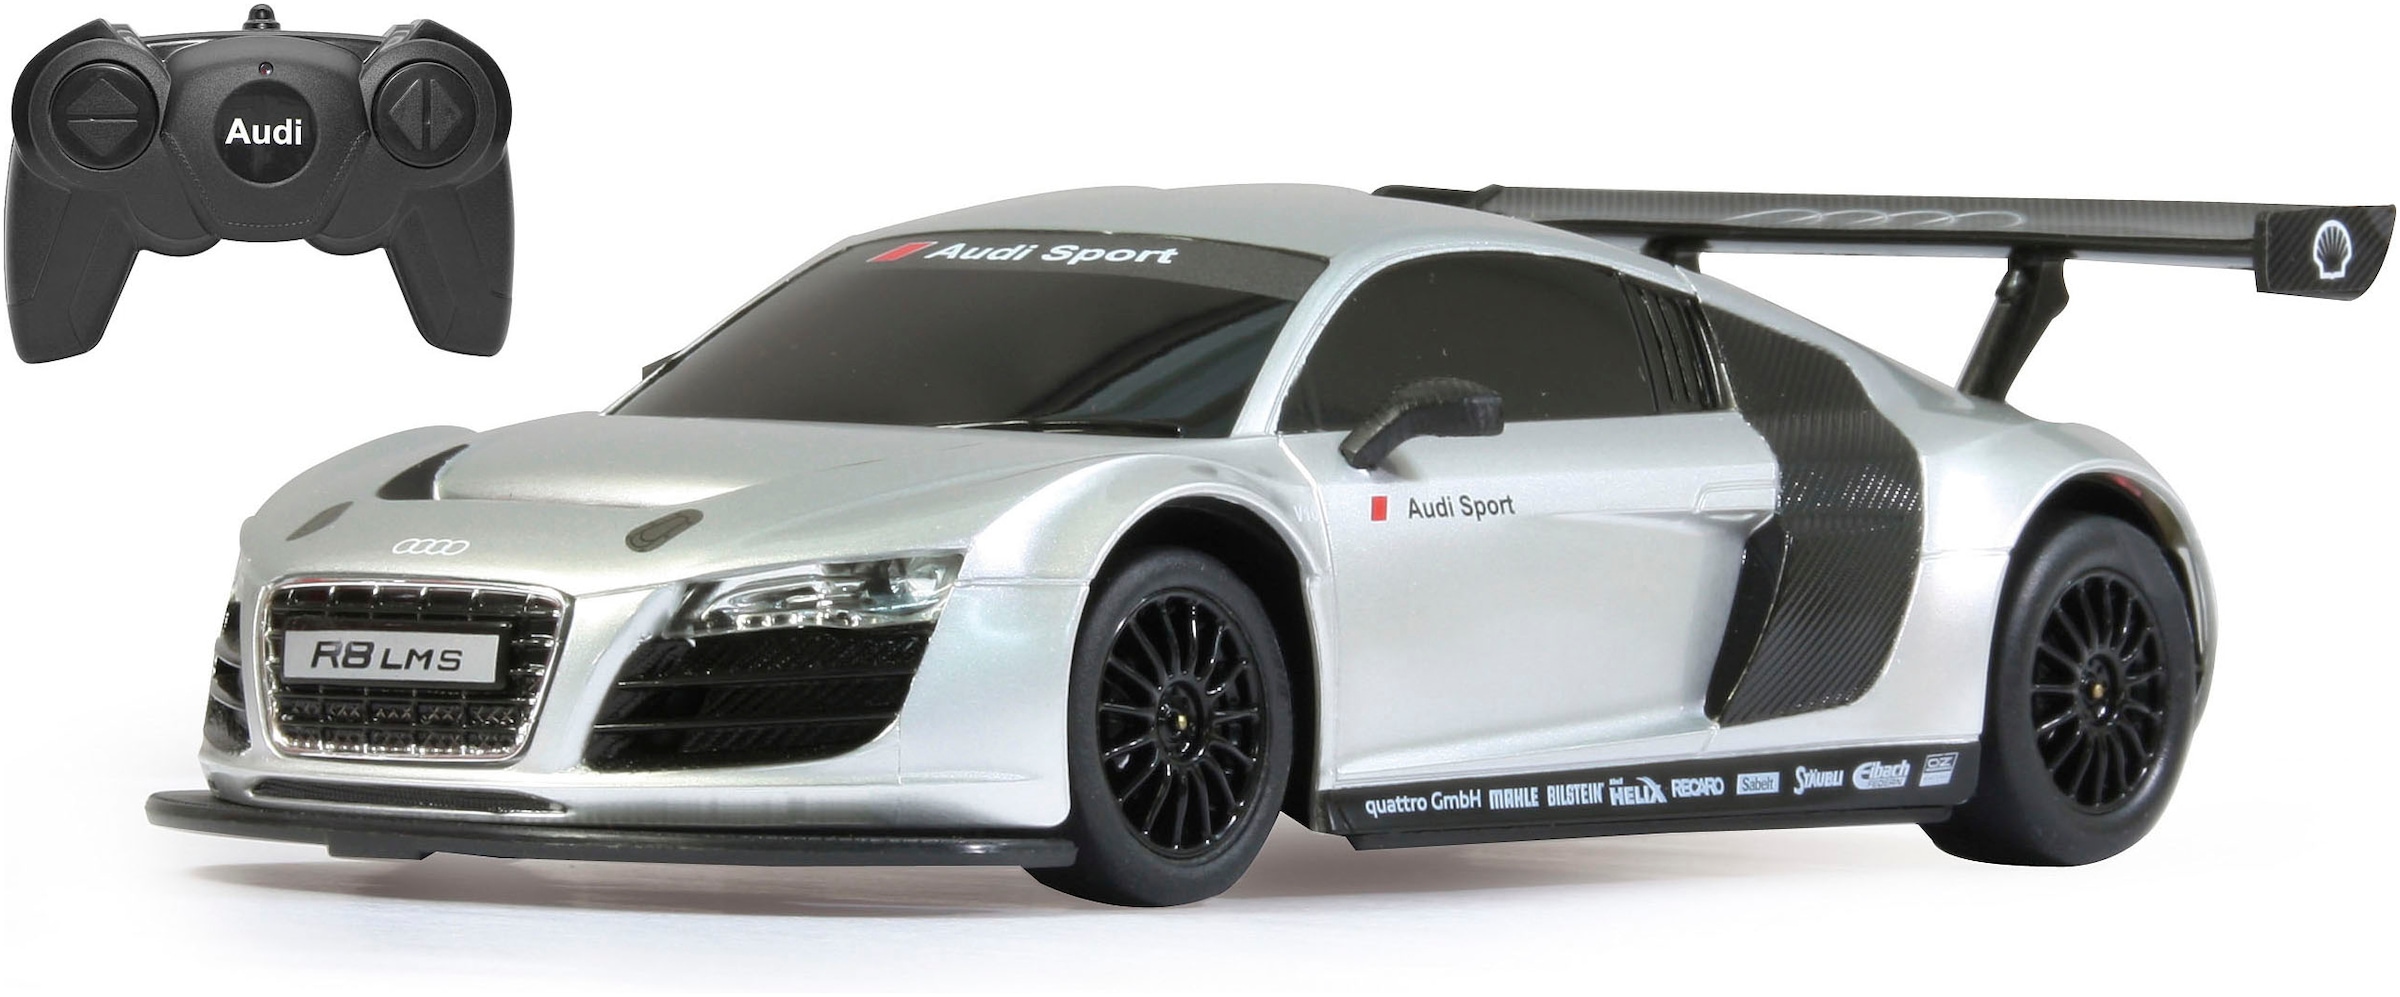 RC-Auto »Deluxe Cars, Audi R8 LMS, 1:24, silber, 2,4Ghz«